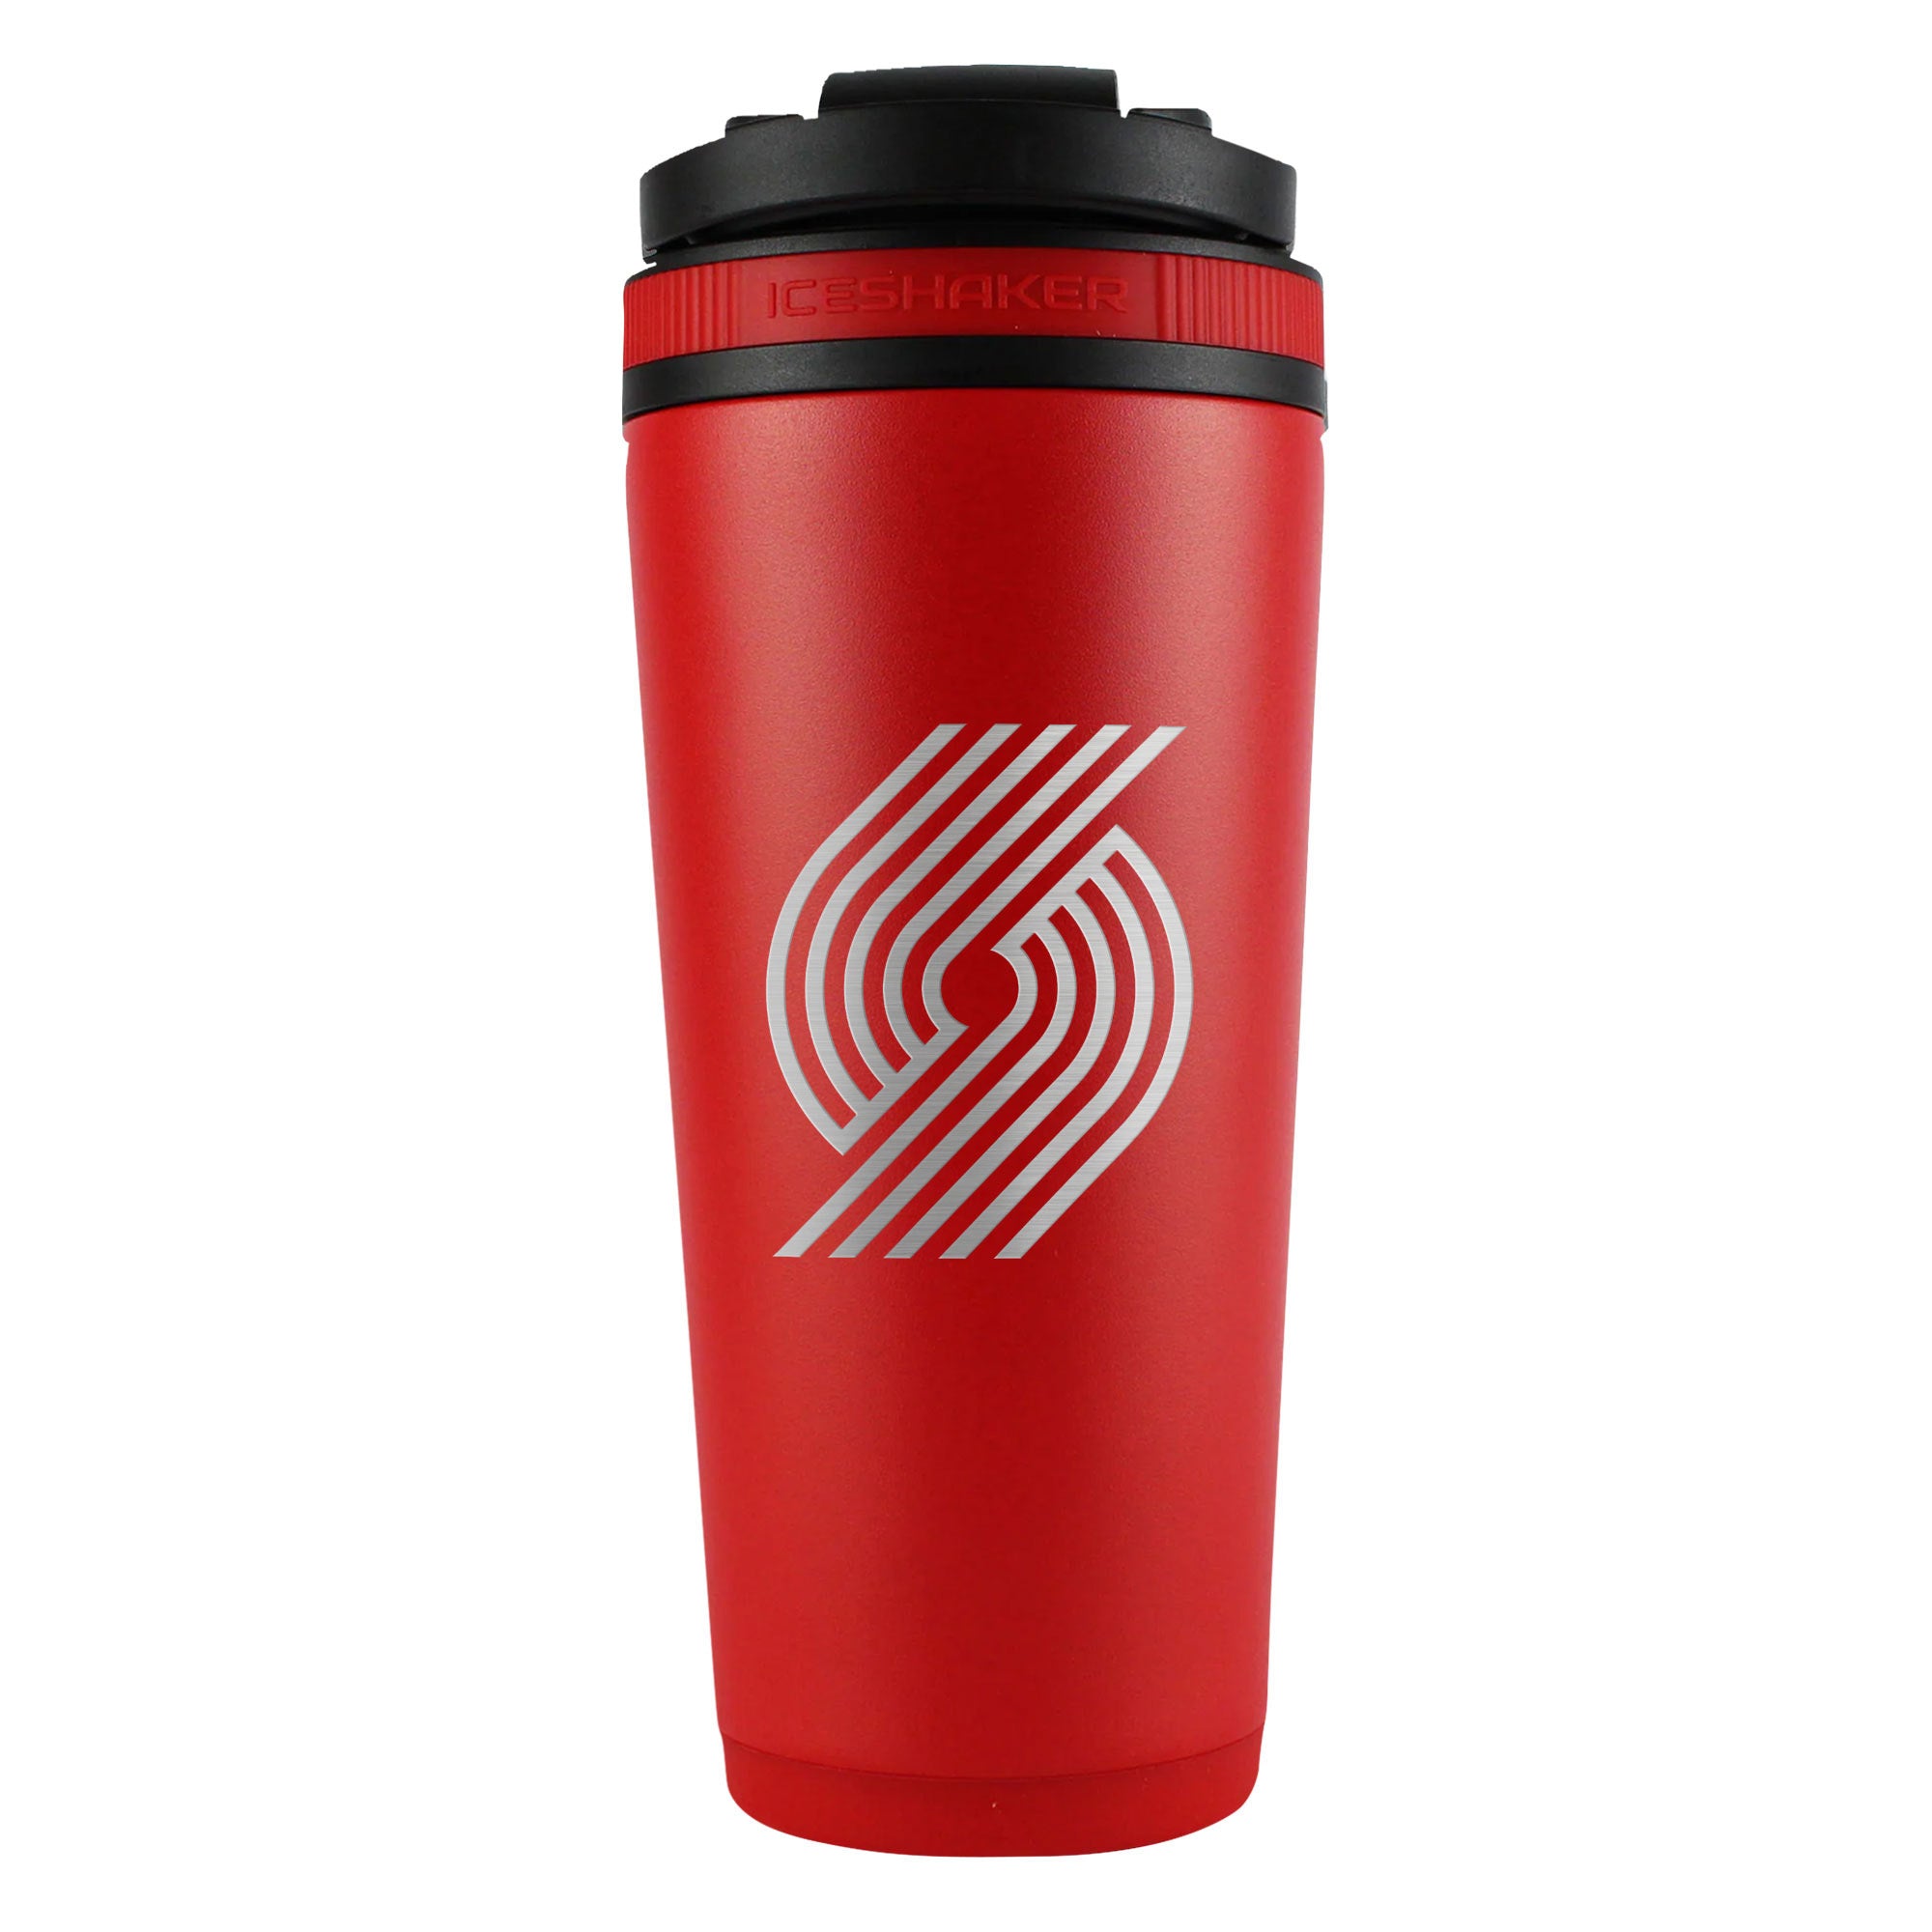 Officially Licensed Portland Trail Blazers 26oz Ice Shaker - Red